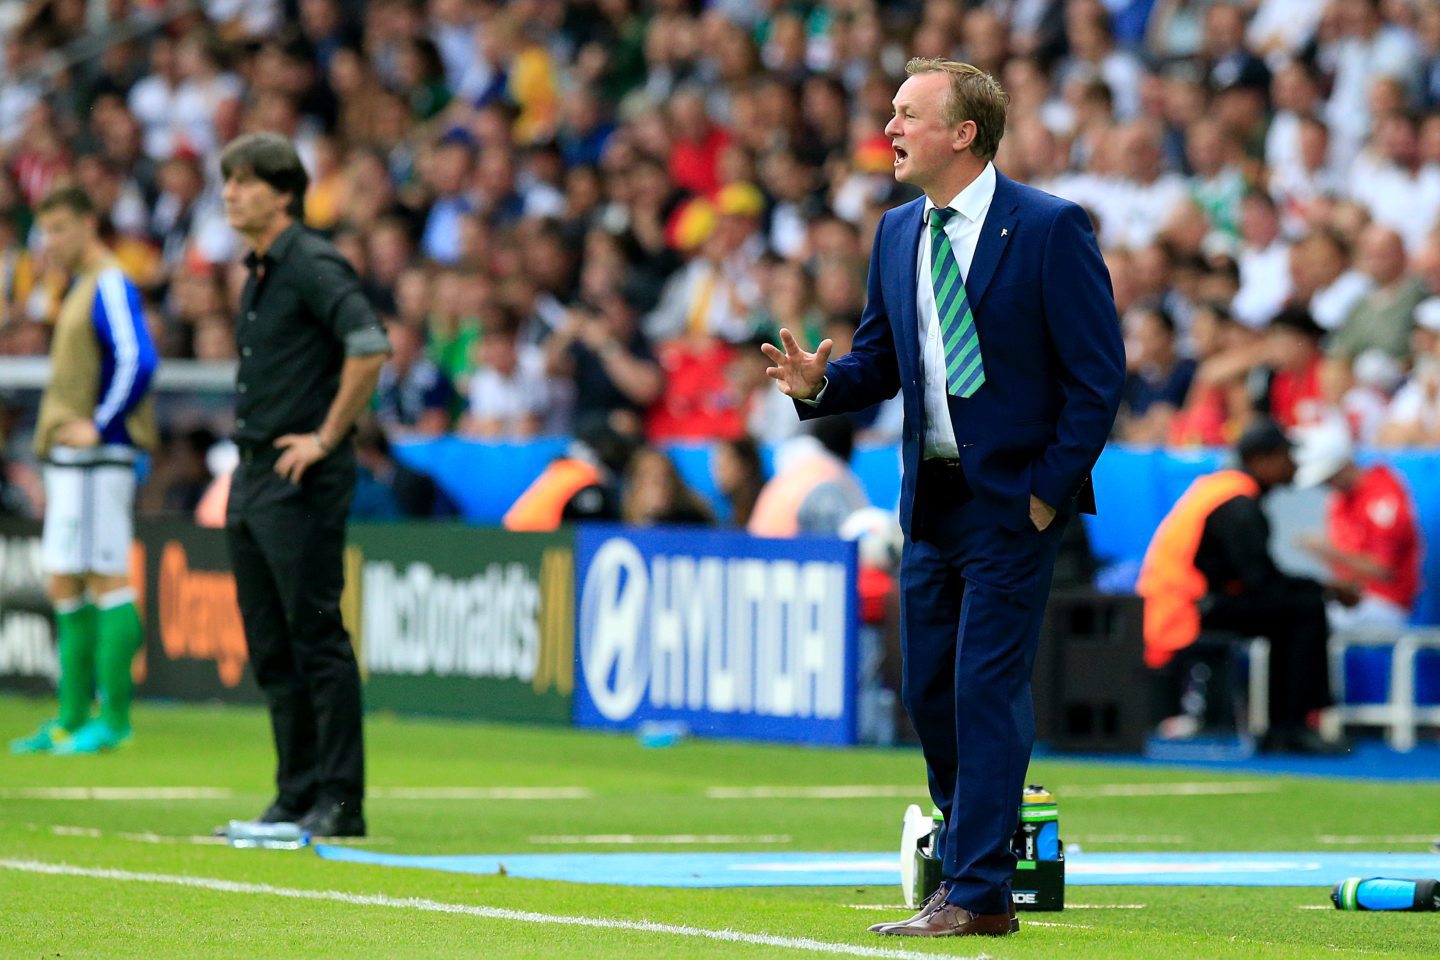 Michael O'Neill on the touchline for Northern Ireland against Germany at Euro 2016 in Paris. Image: PA